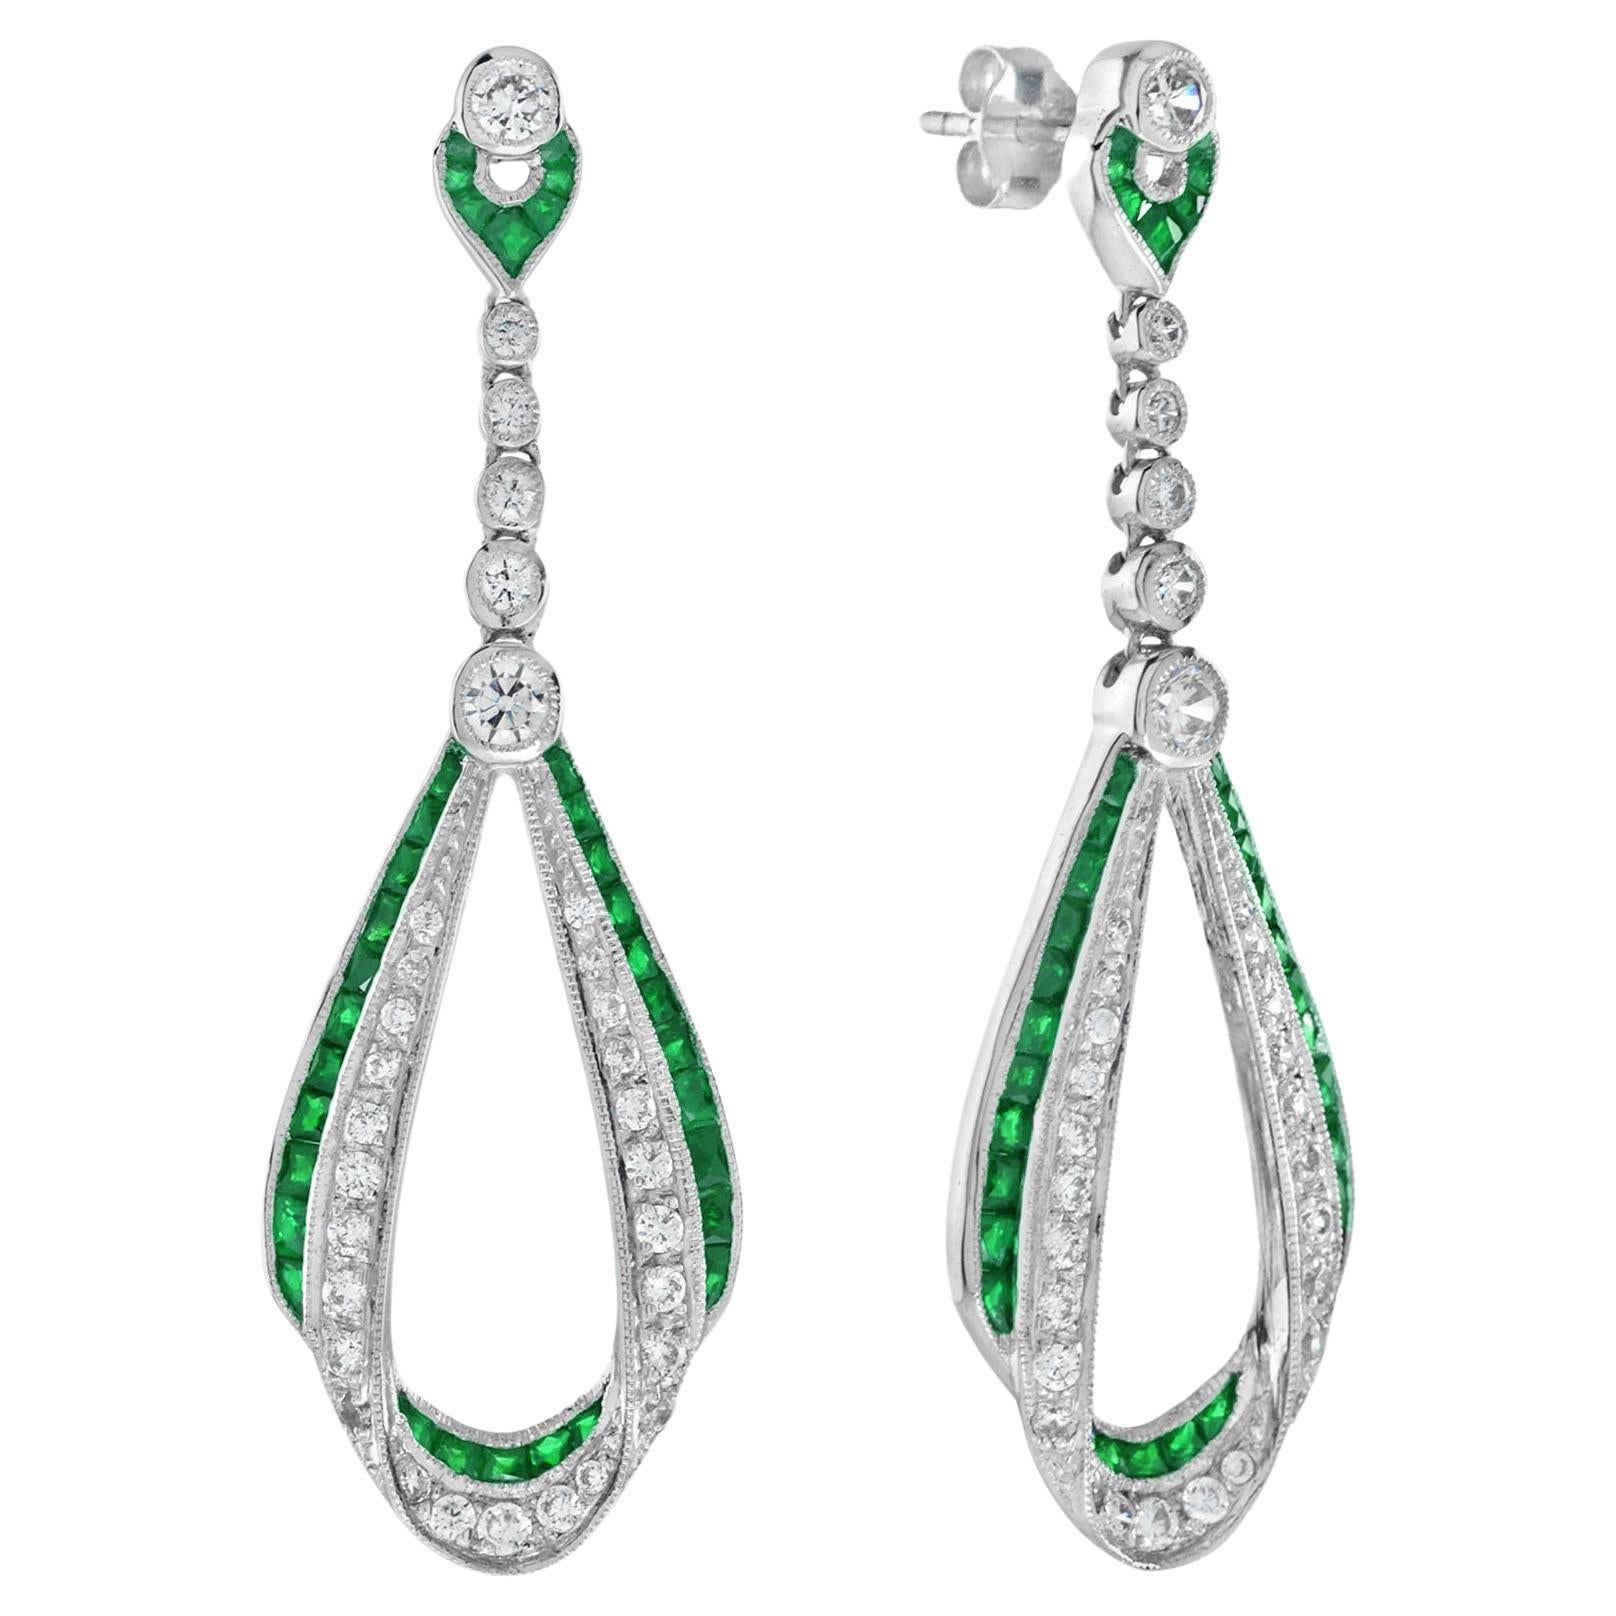 Emerald and Diamond Art Deco Style Ribbon Drop Earrings in 18K White Gold